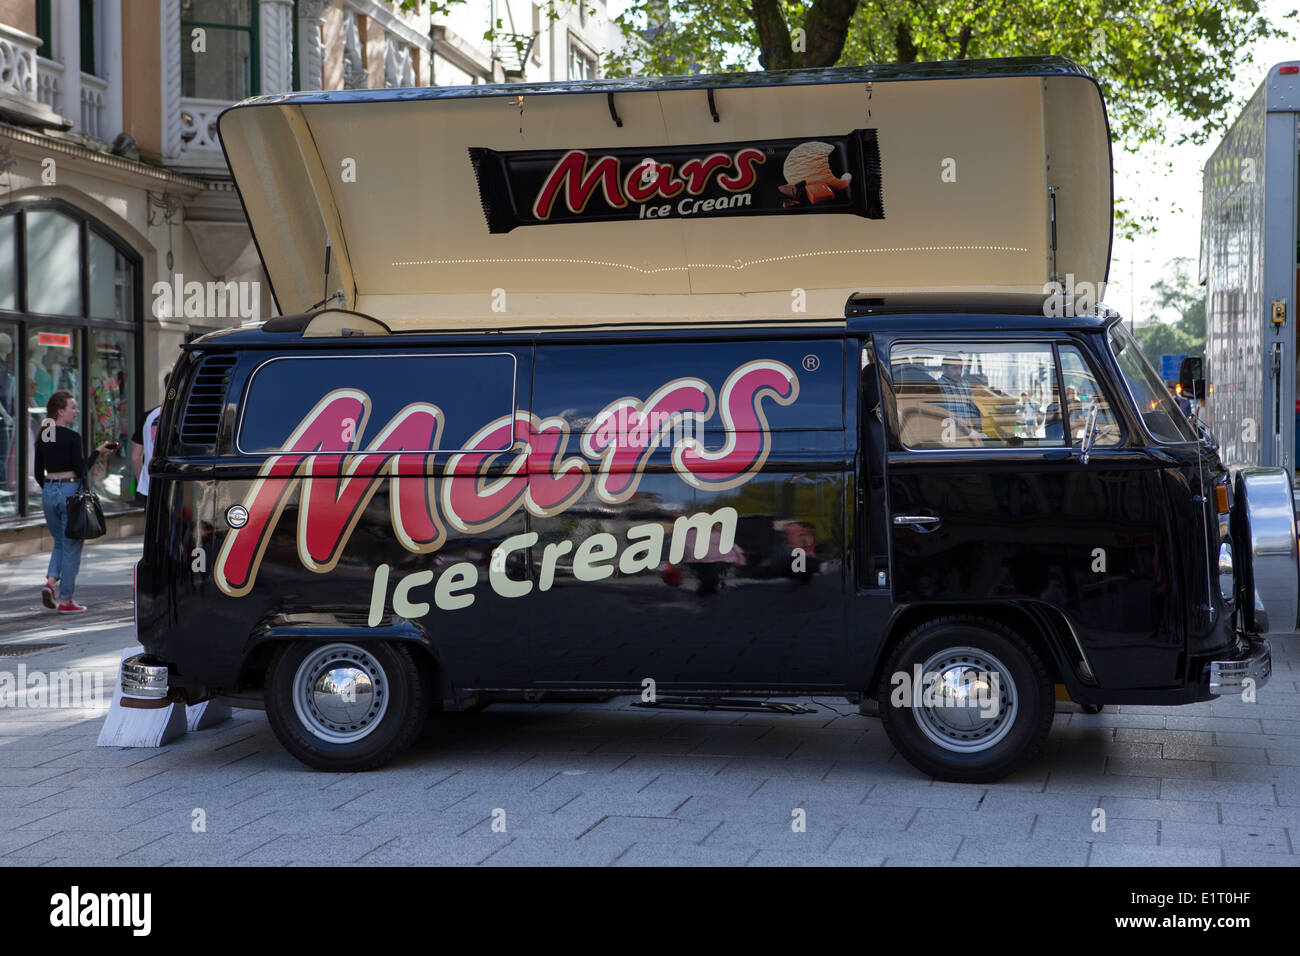 1976 70s Black Mars Ice Cream promotional VW Volkswagen business camper type vehicle in Cardiff city centre, Wales, UK Stock Photo